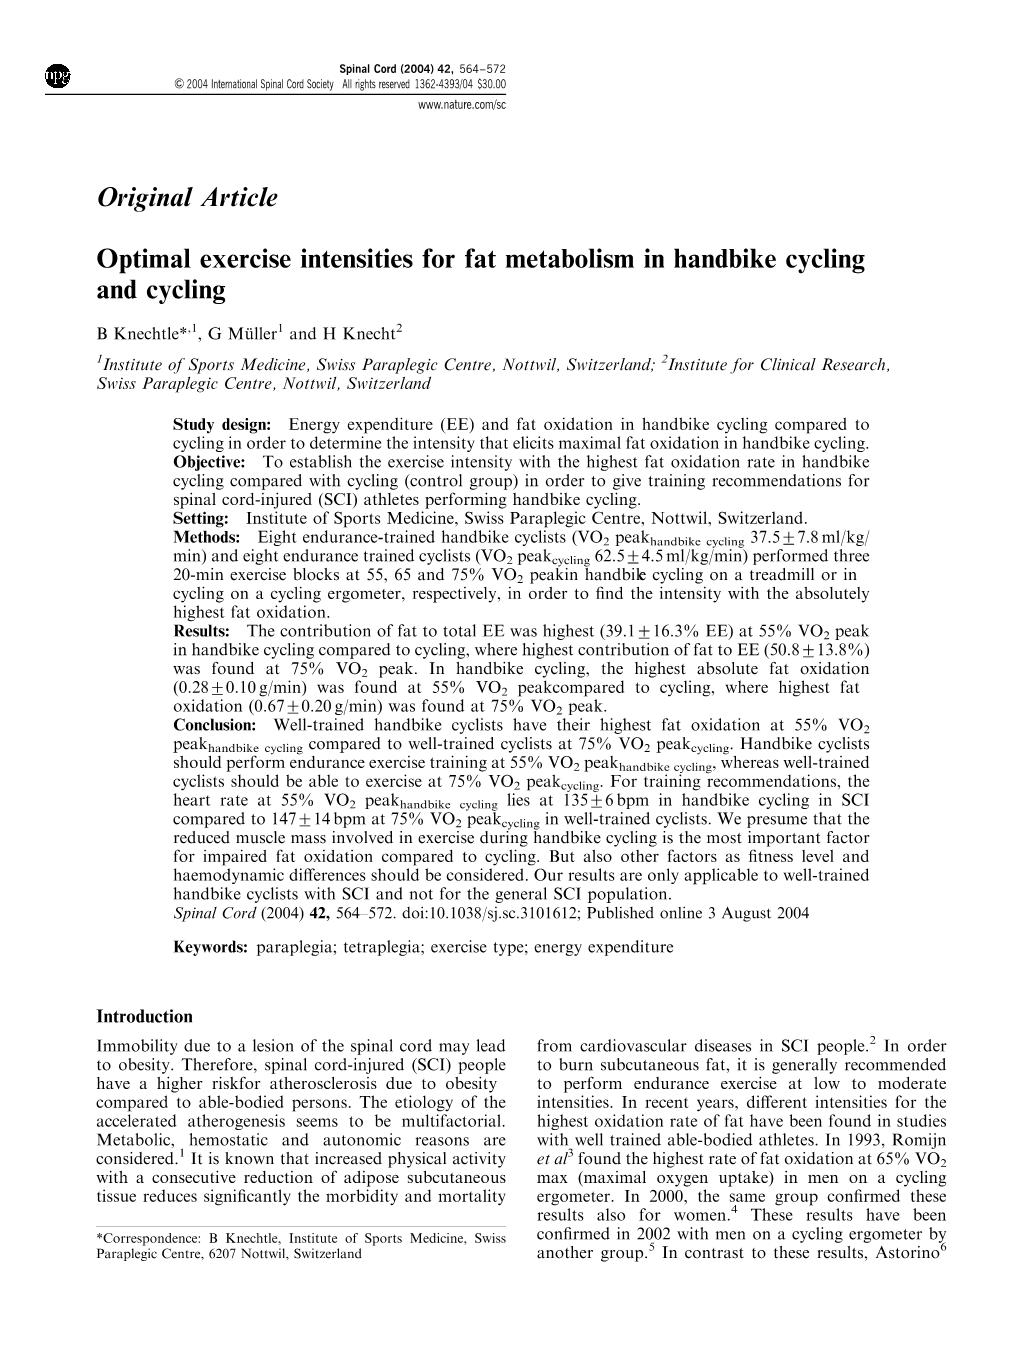 Optimal Exercise Intensities for Fat Metabolism in Handbike Cycling and Cycling